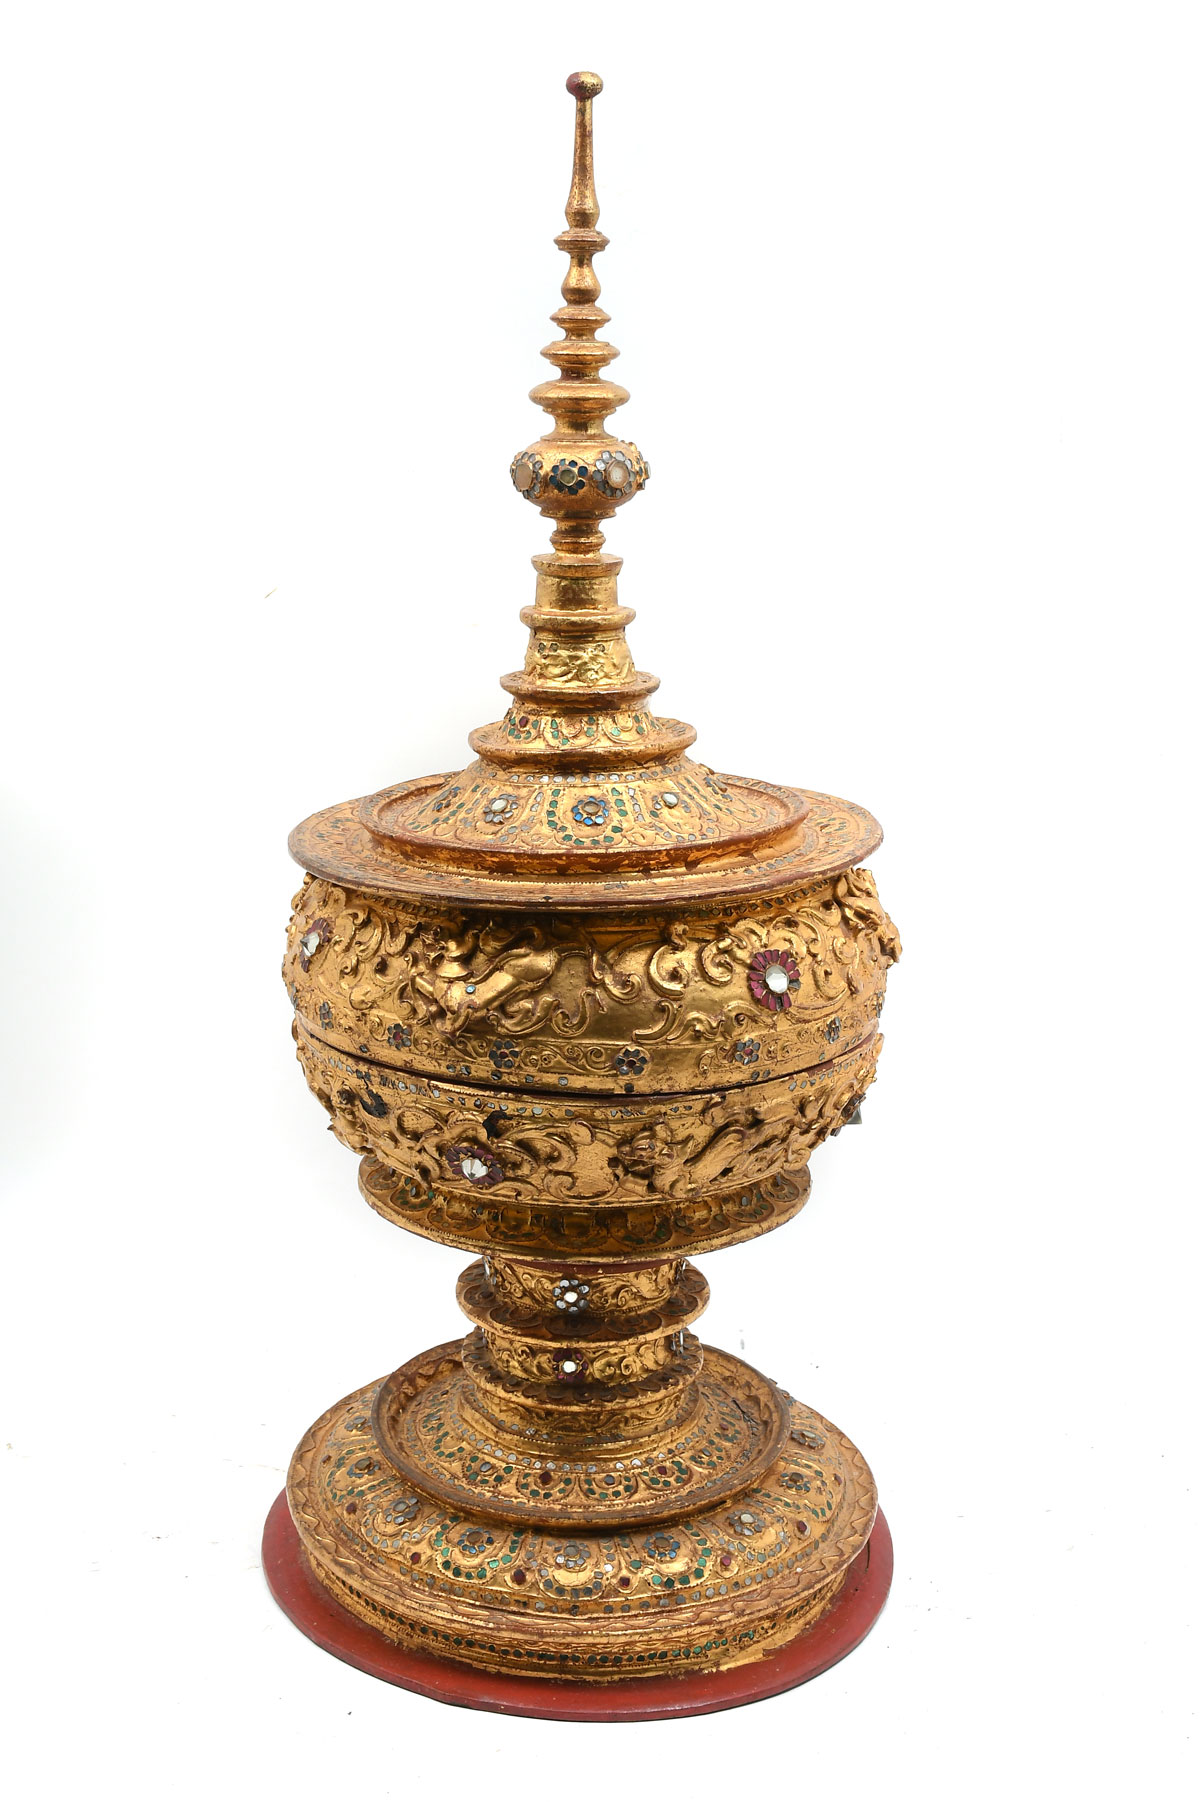 CHINESE GILT LACQUER COVERED VESSEL: